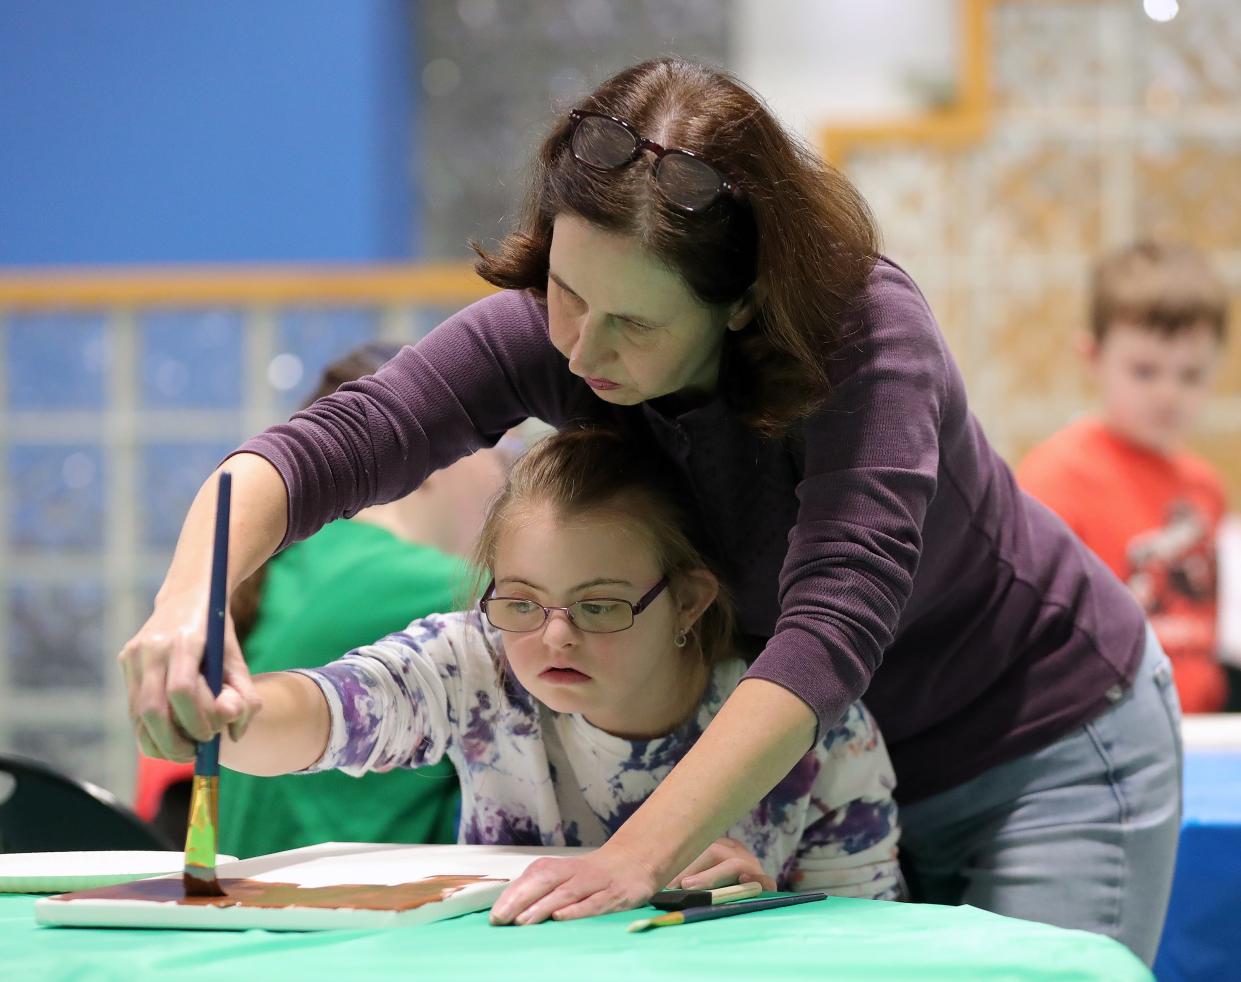 Laura Gehlmann, top, and her daughter Elaina, 13, of Medina work on a holiday painting during an Integrated Community Solutions art class at Medina County Board of Developmental Disabilities in Medina.